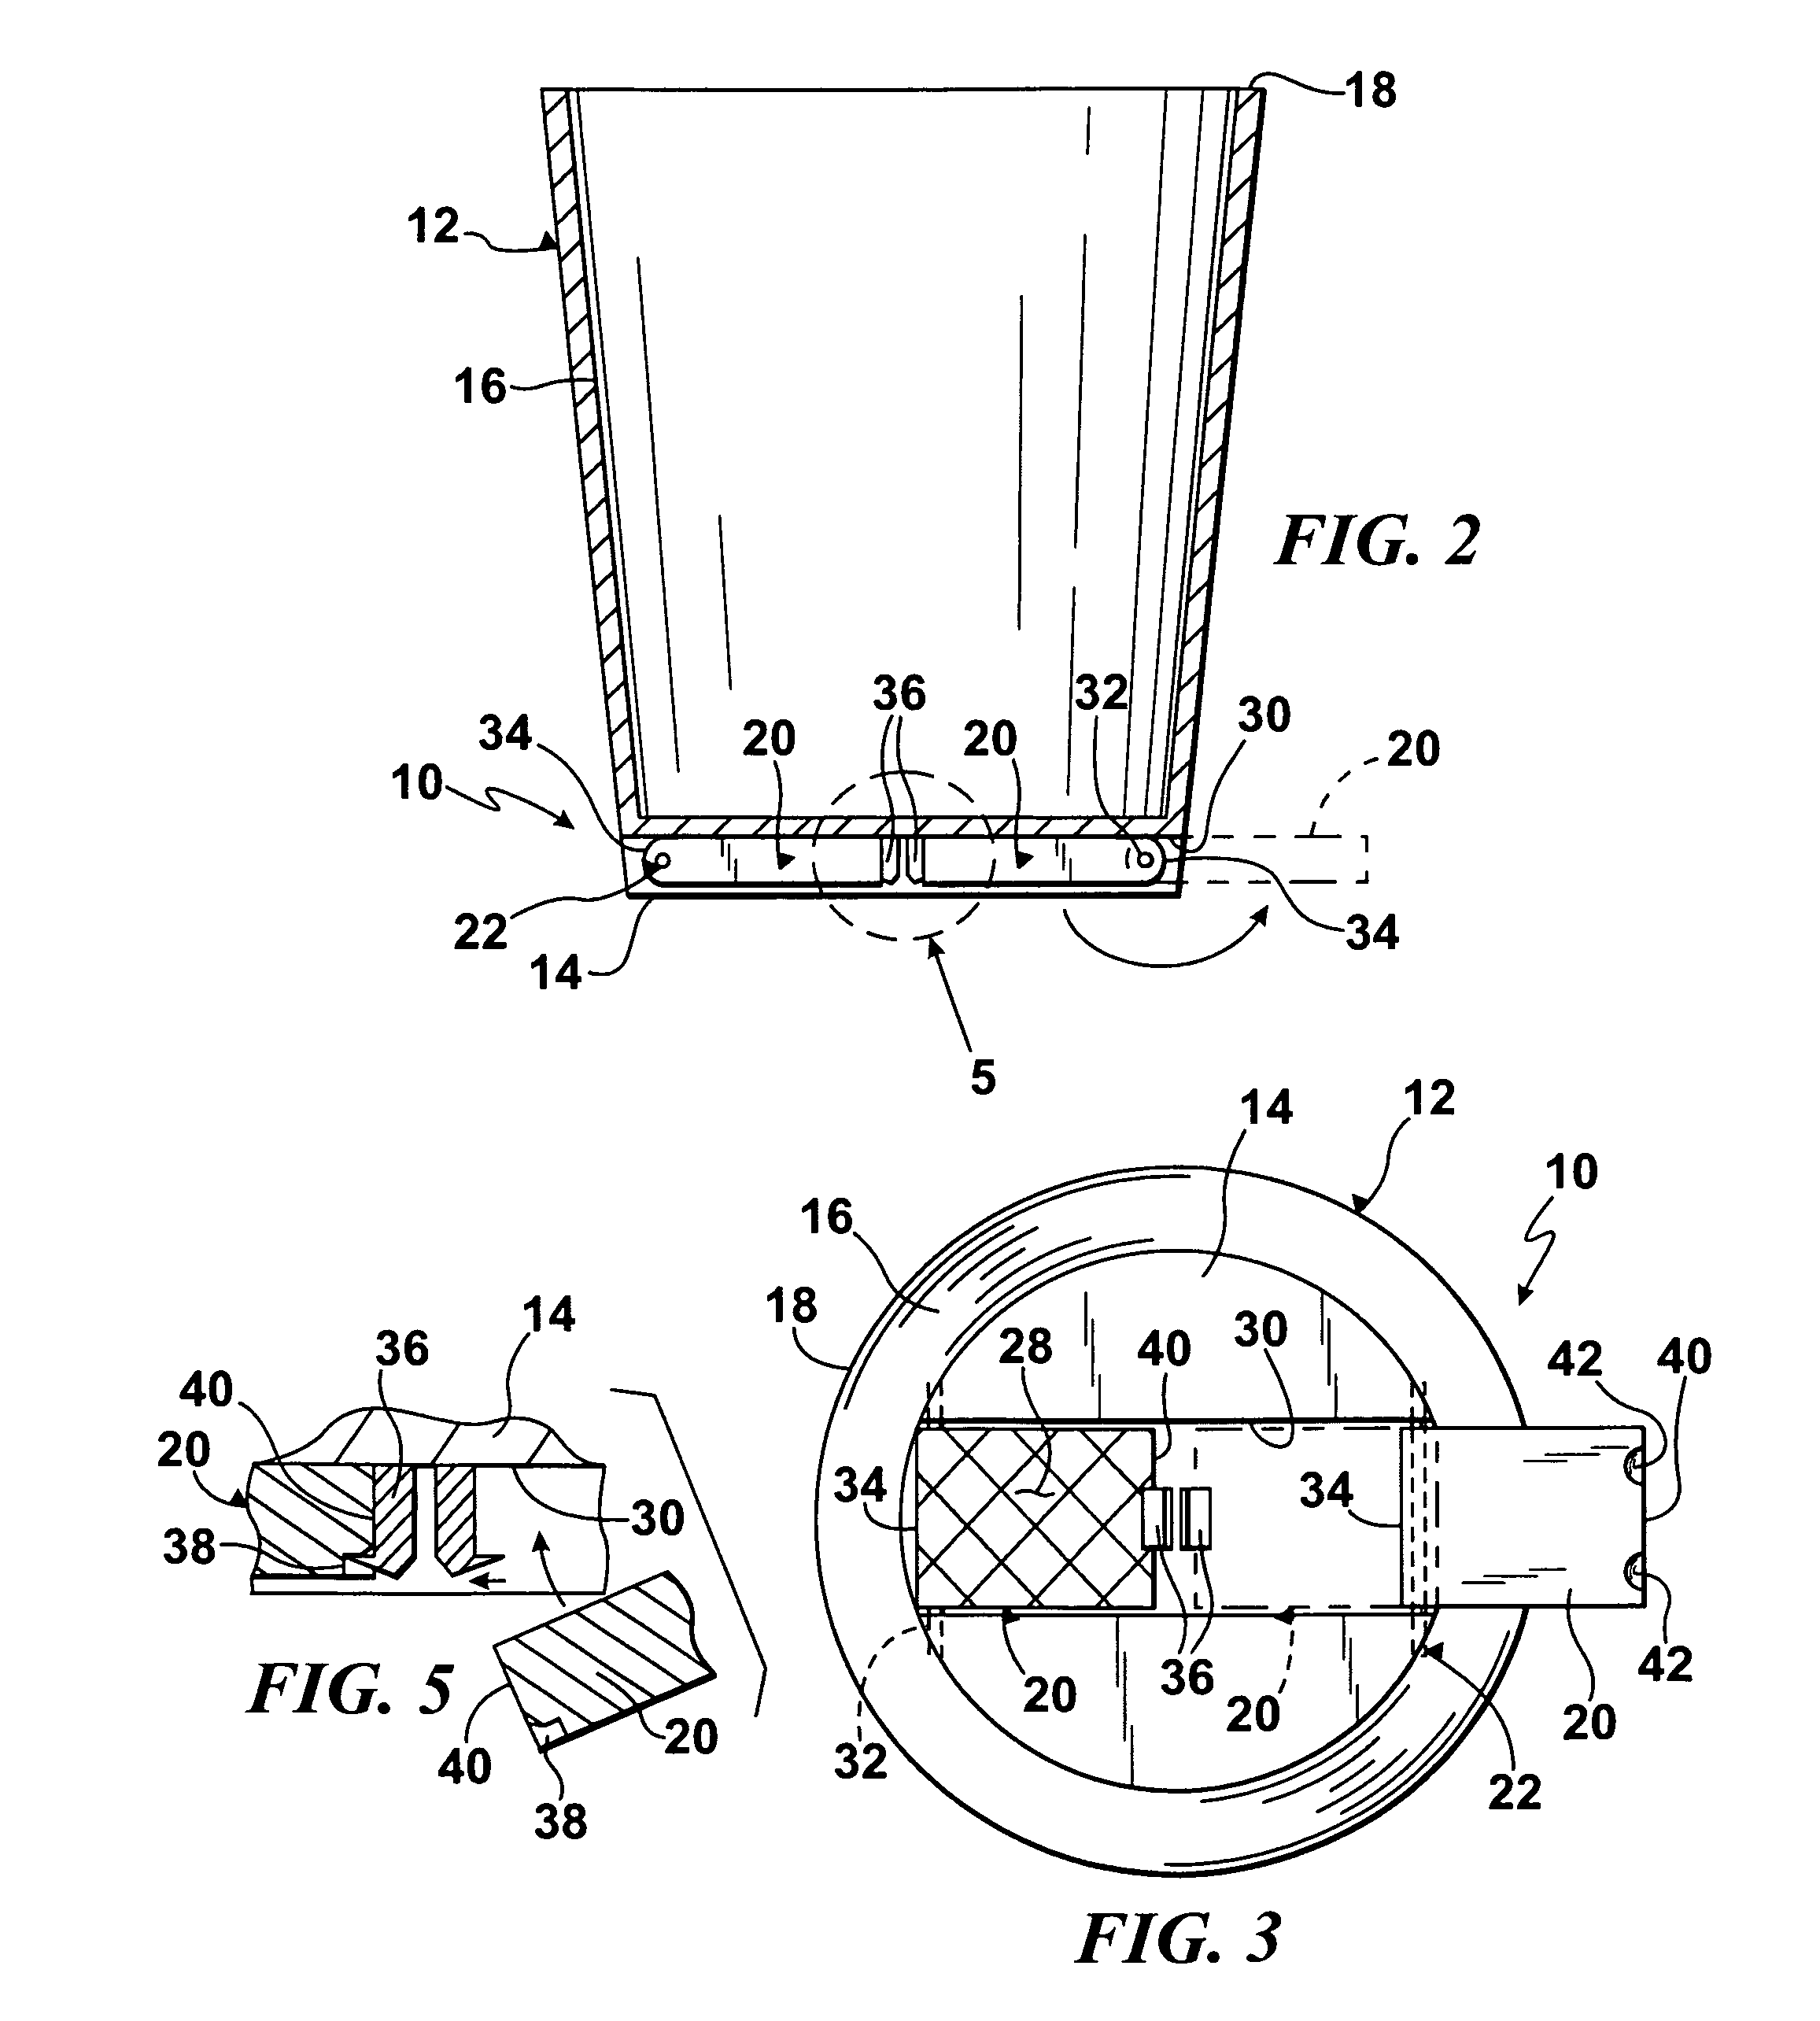 Apparatus for holding a stackable bucket in place when mixing materials therein